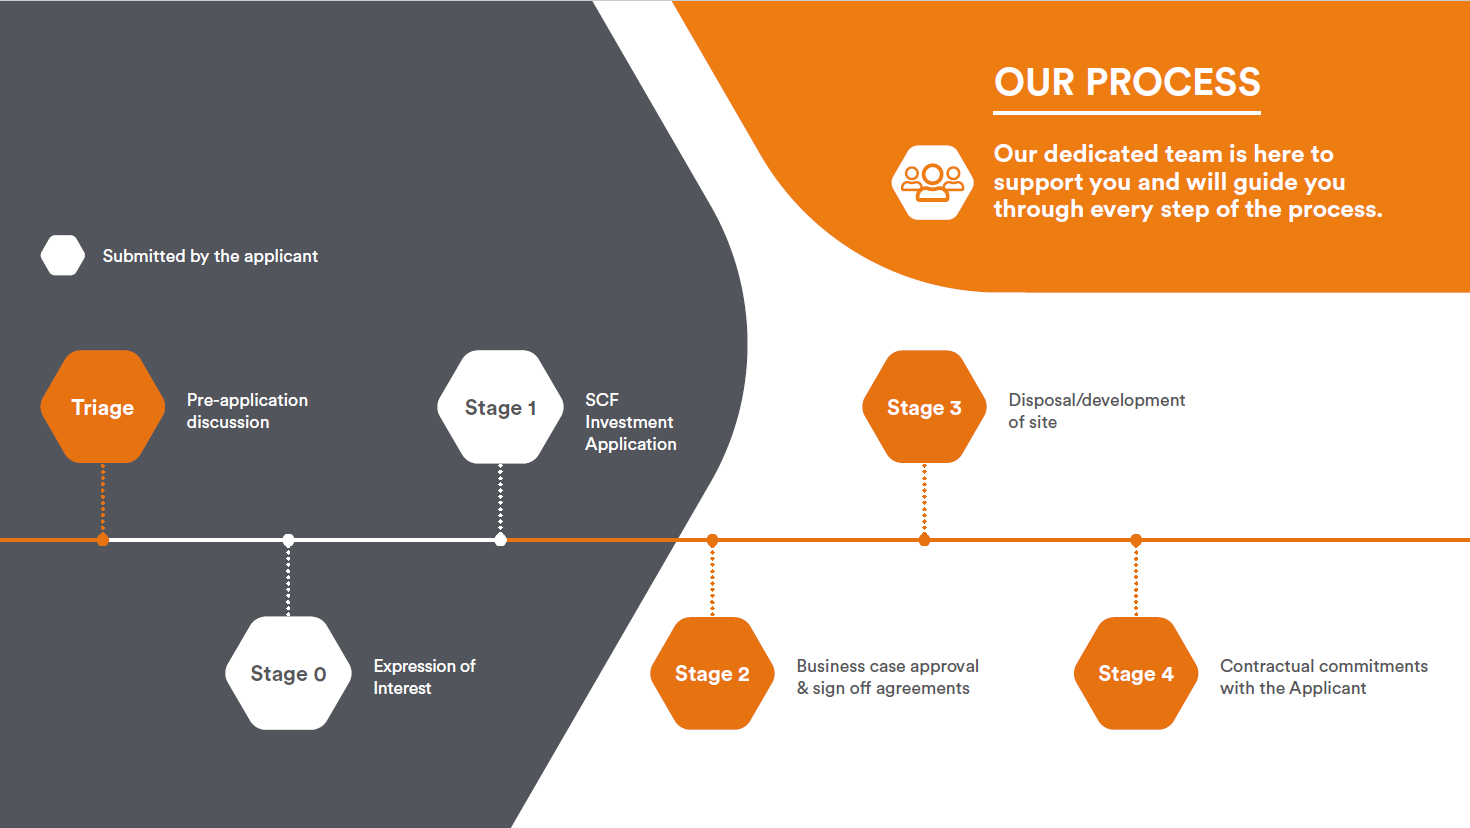 A graphic detailing the WMCA Investing process. Our process: Submission by applicant, Triage: Pre-application discussion, Stage 0: expression of interest, Stage 1: SCF Investment Application, Stage 2: Business case approval & sign off agreements, Stage 3: Disposal/development of site, Stage 4: Contractual commitments with the applicant.